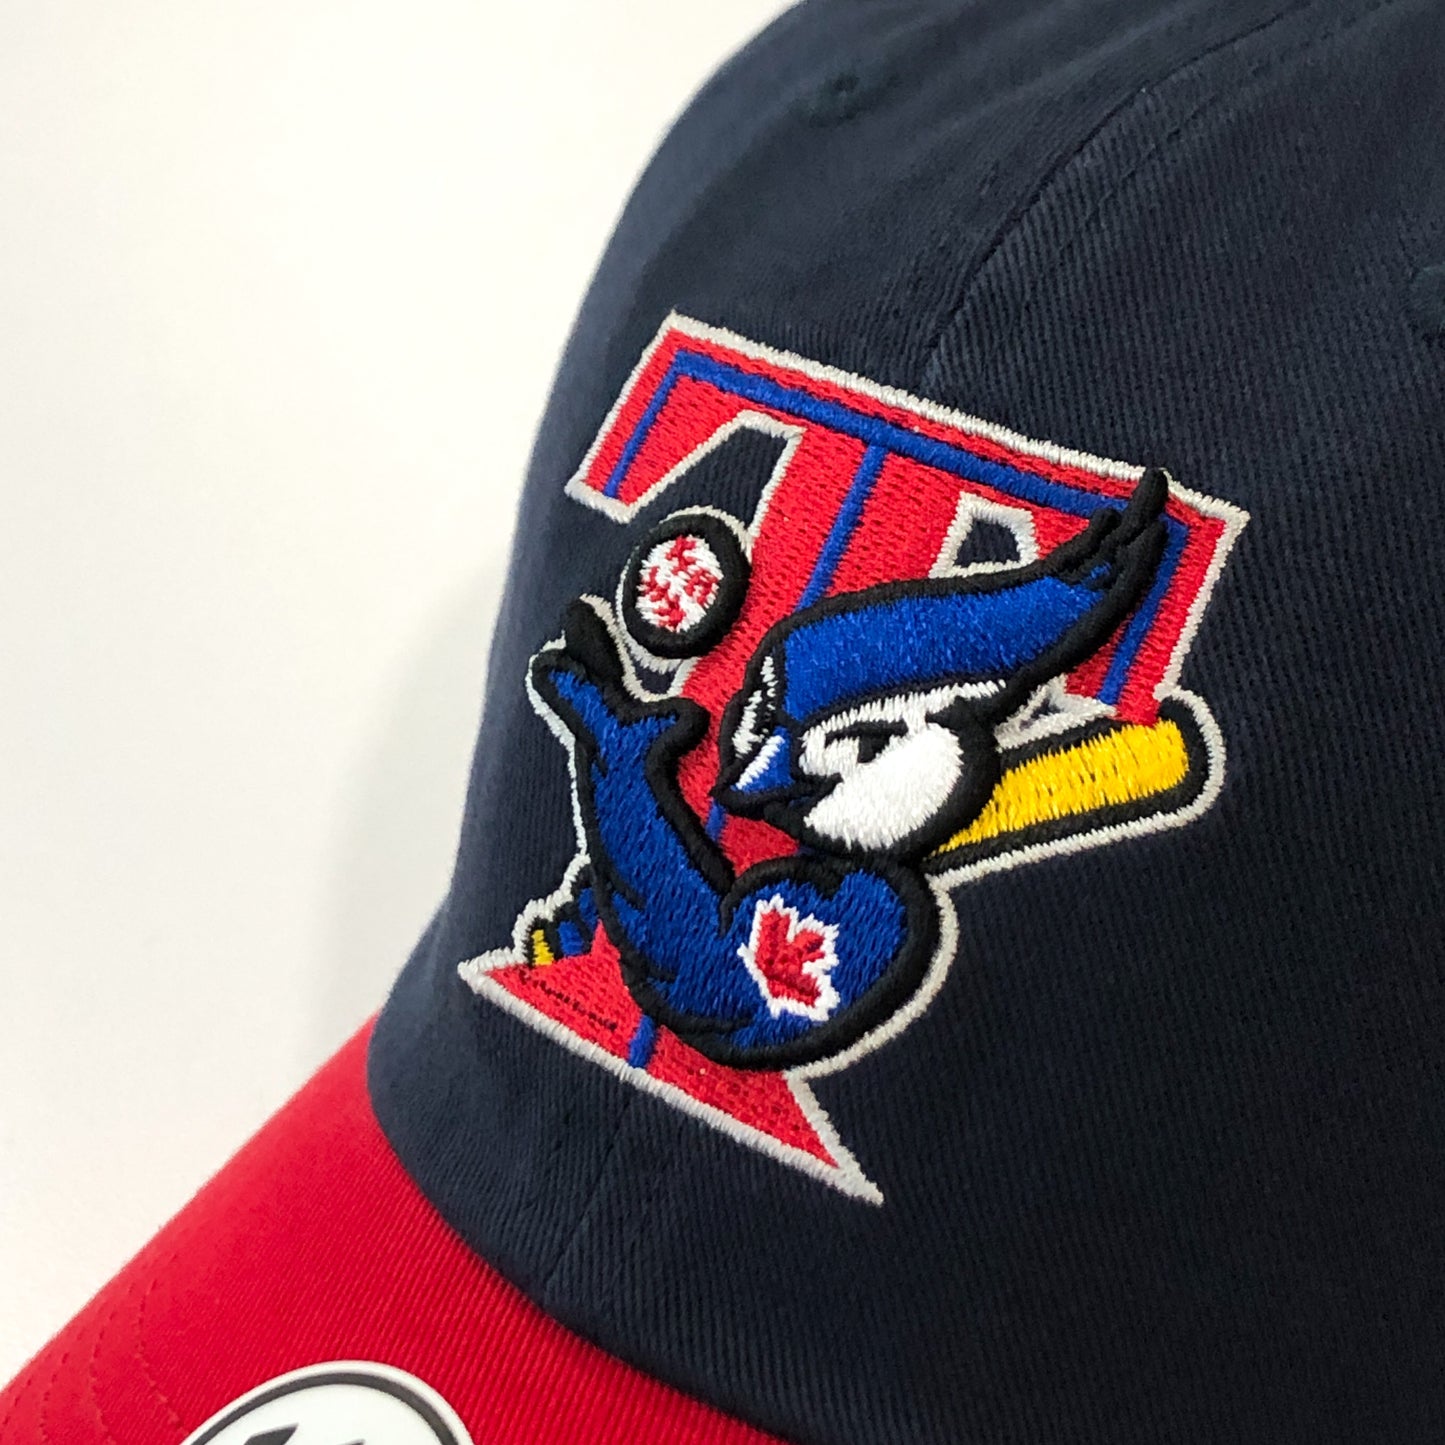 47 Clean Up Two Tone Toronto Blue Jays 2003 Hat